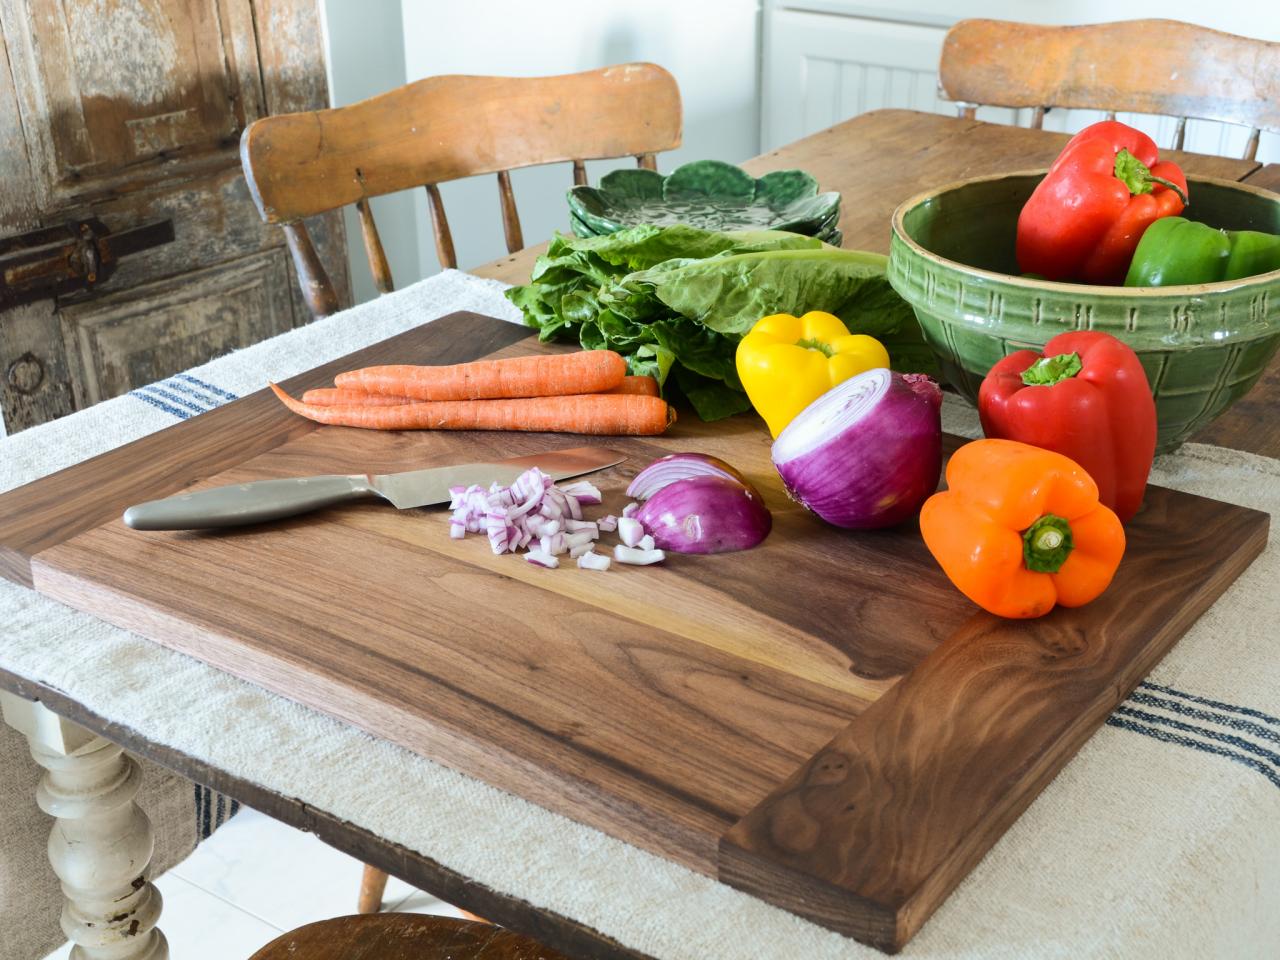 How to Make a Wood Cutting Board for Your Kitchen | HGTV Can I Put A Wooden Cutting Board In The Oven